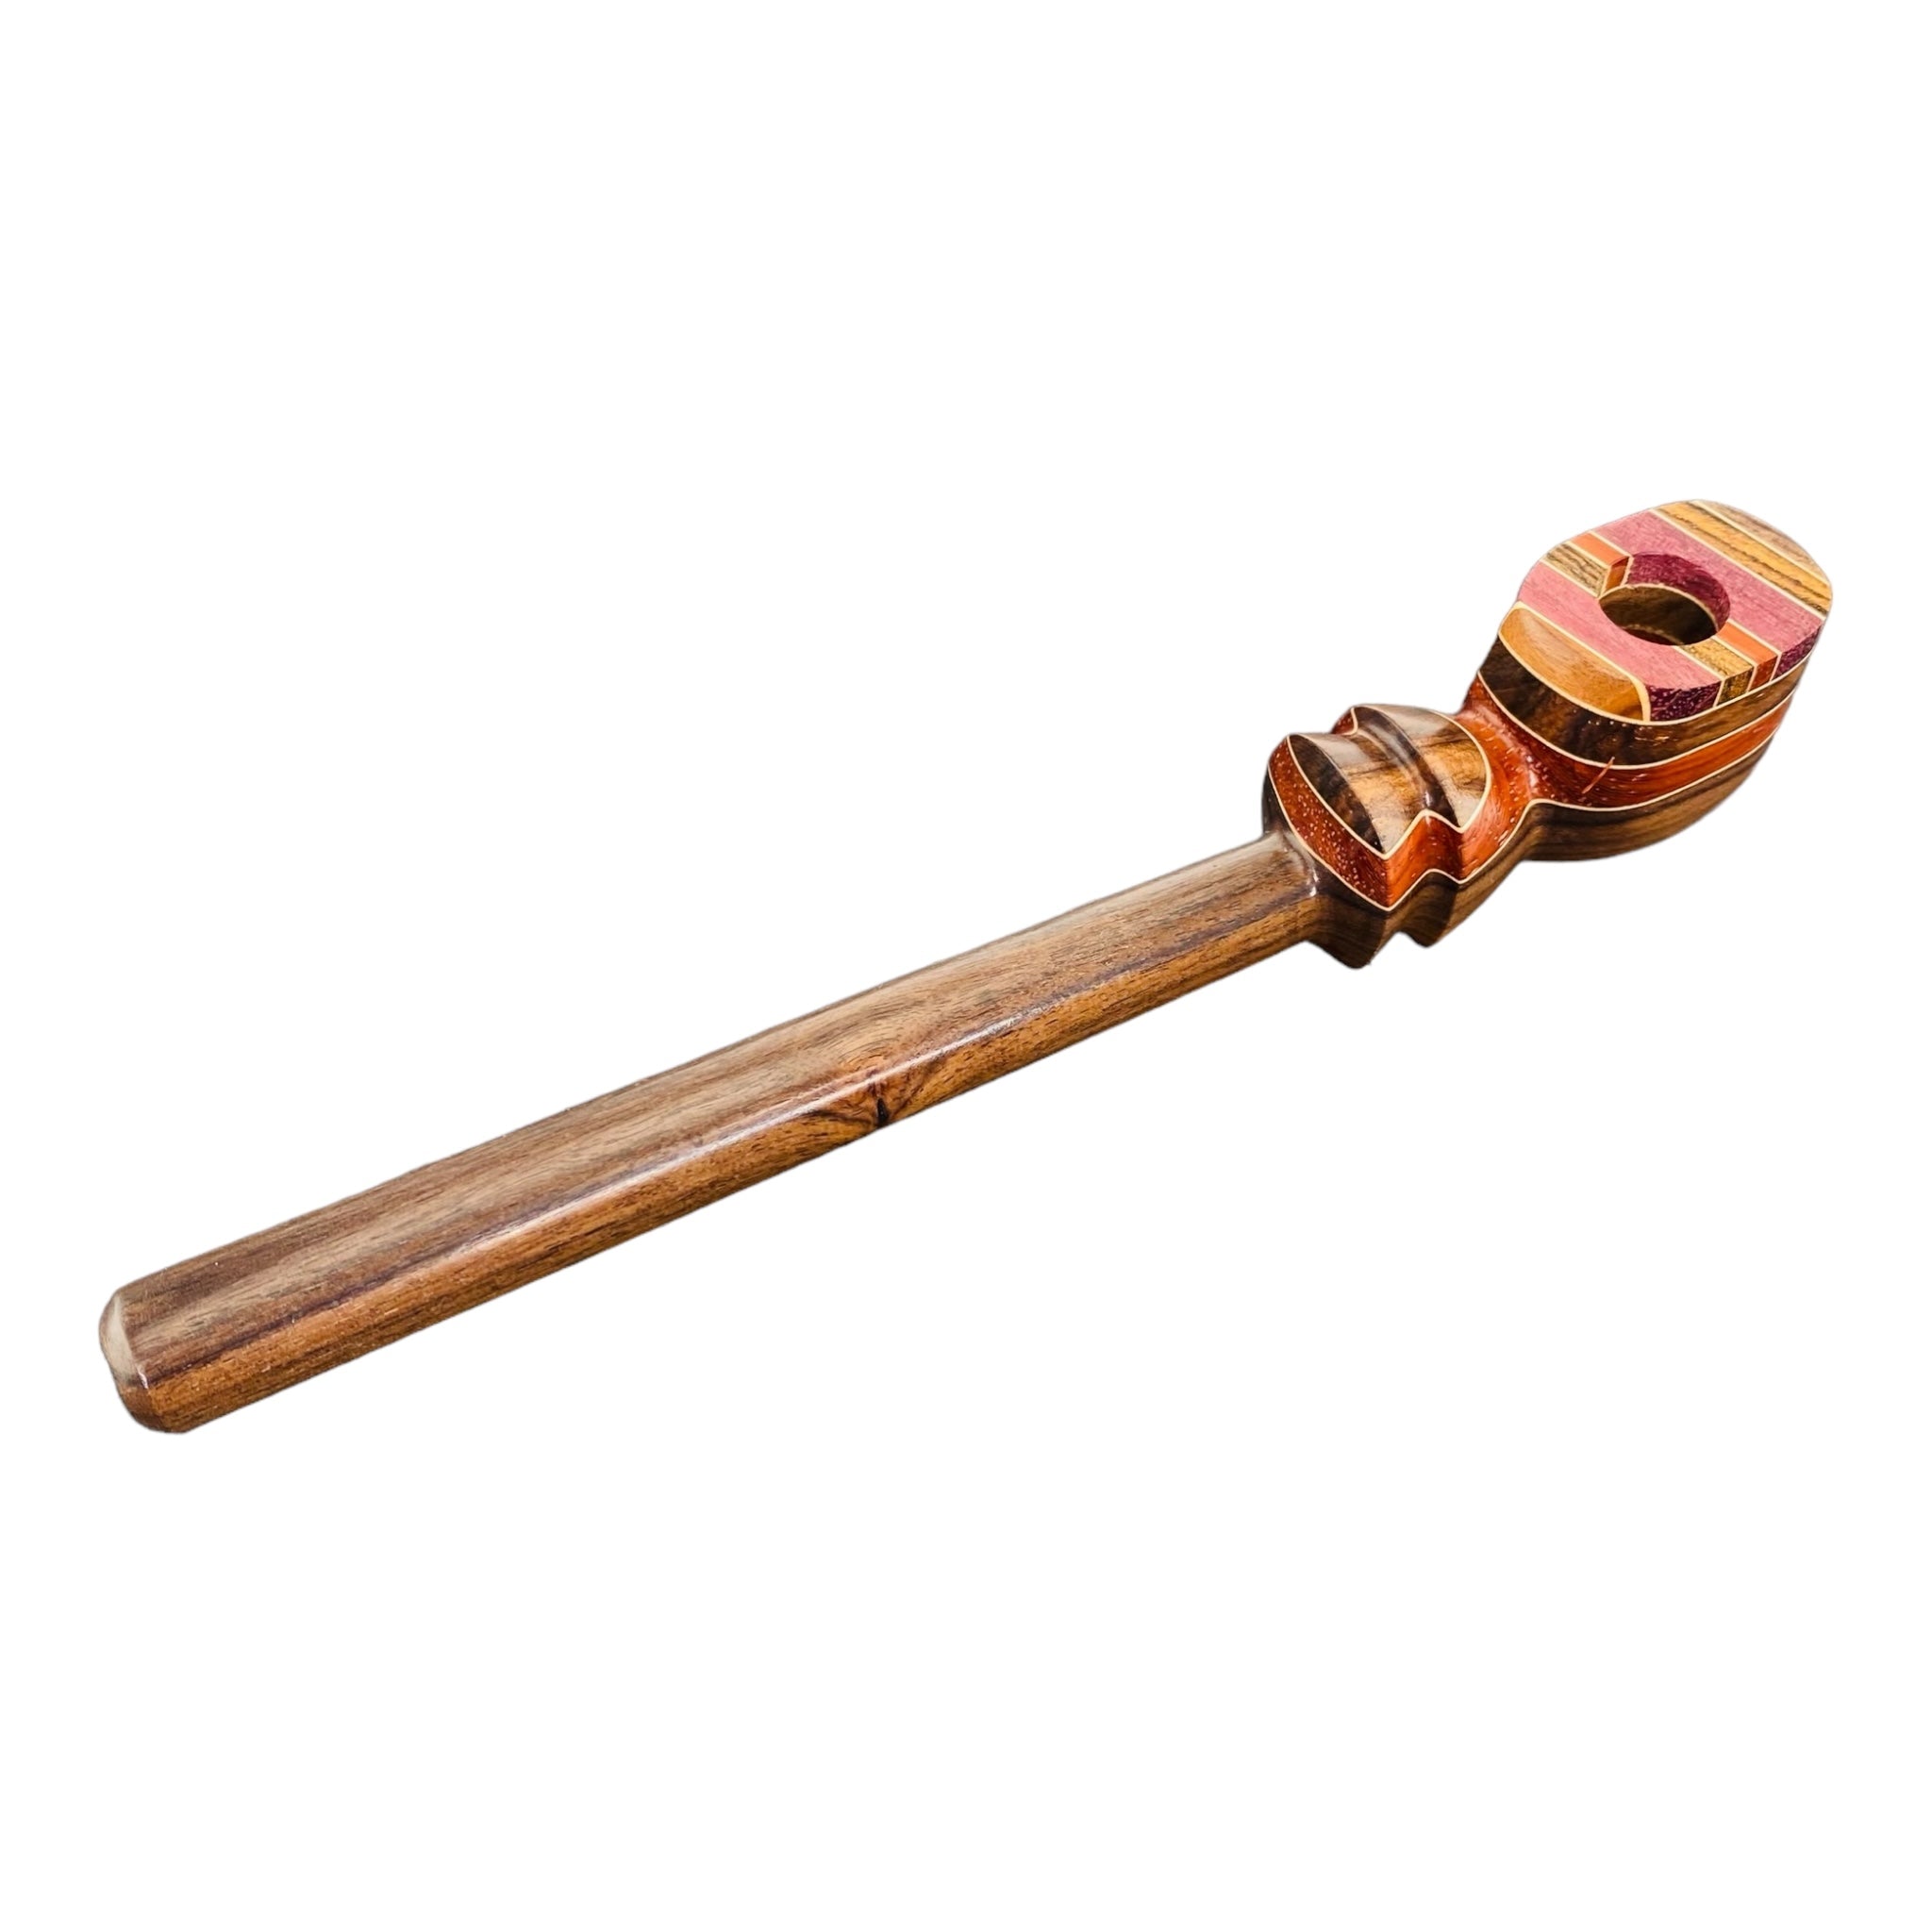 Wood Hand Pipe - 8 Inch Long Stem Peace Pipe Shape Wood Pipe